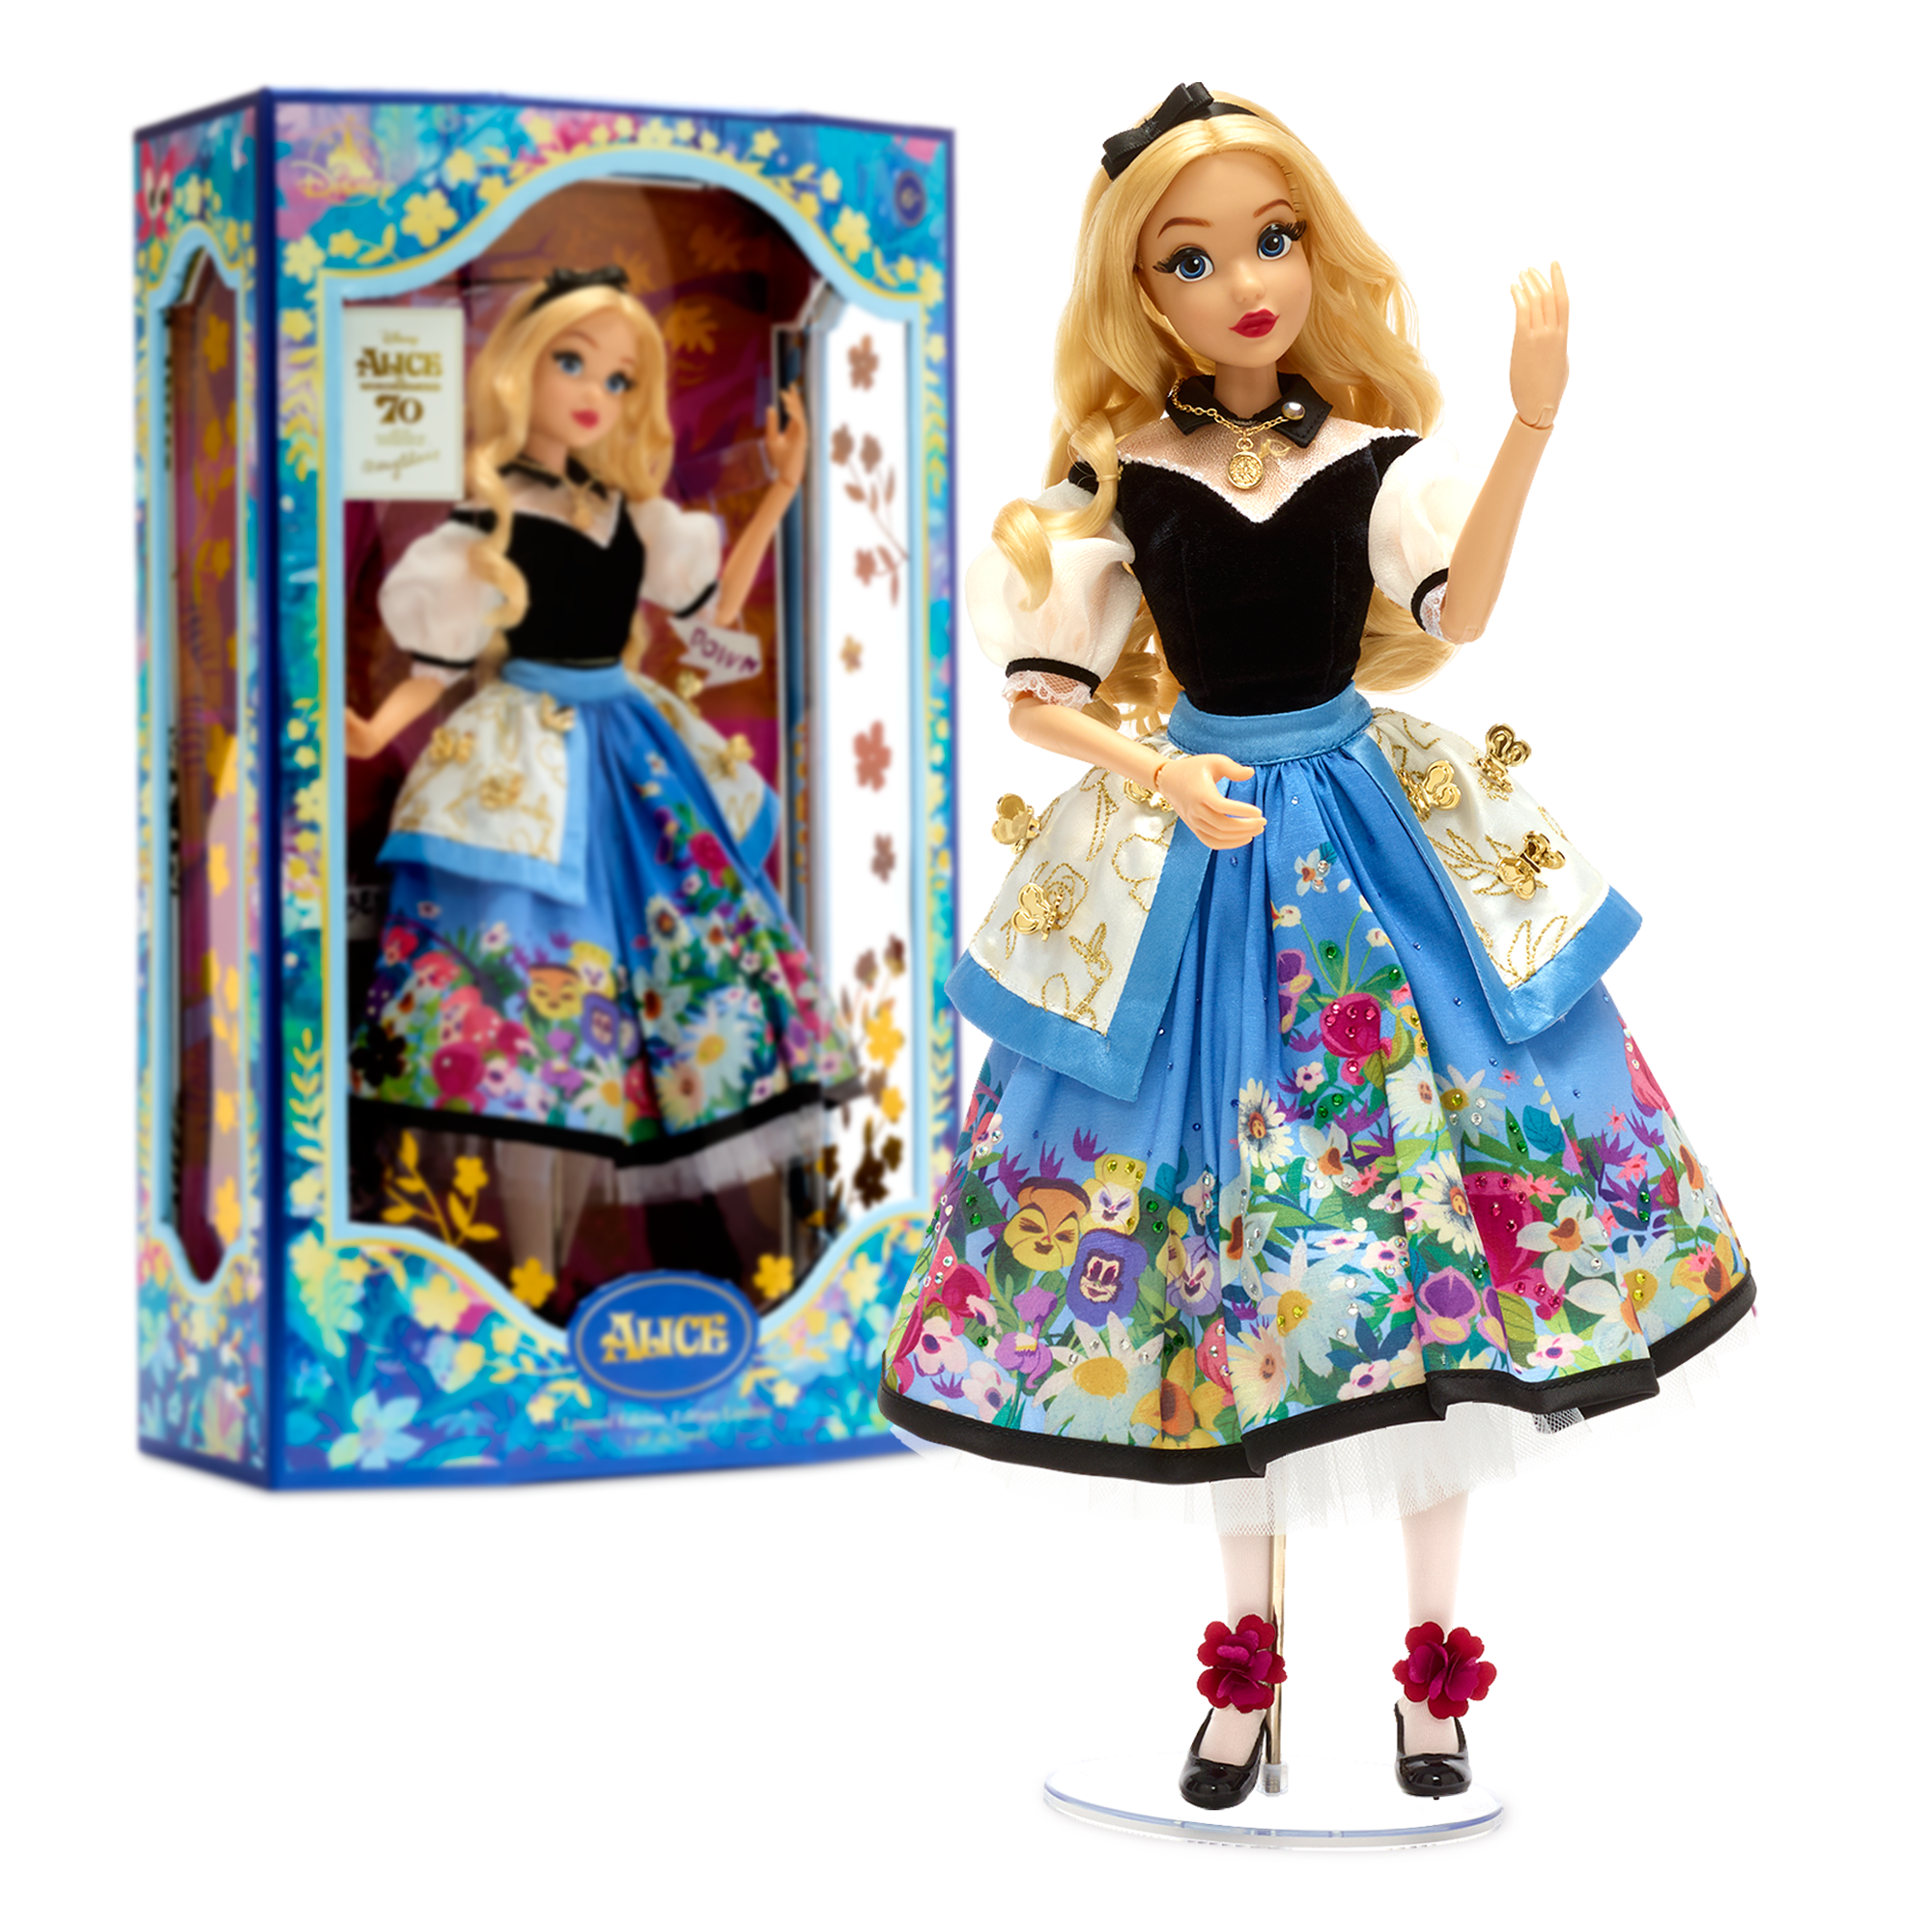 https://static.wikia.nocookie.net/disneydolls/images/2/24/AliceMaryBlair70thAnniversaryDoll8.png/revision/latest?cb=20211113173439